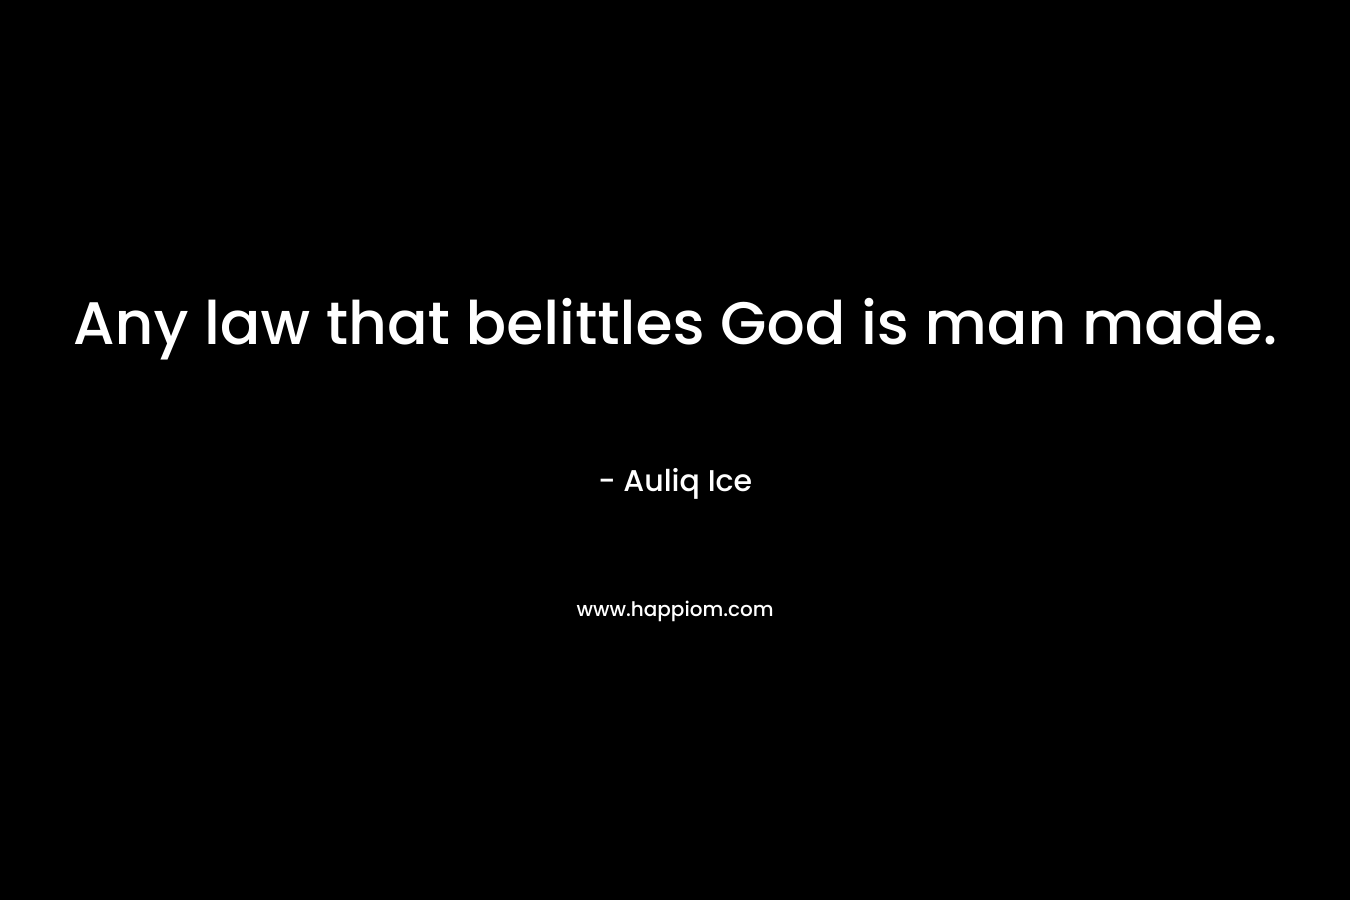 Any law that belittles God is man made. – Auliq Ice